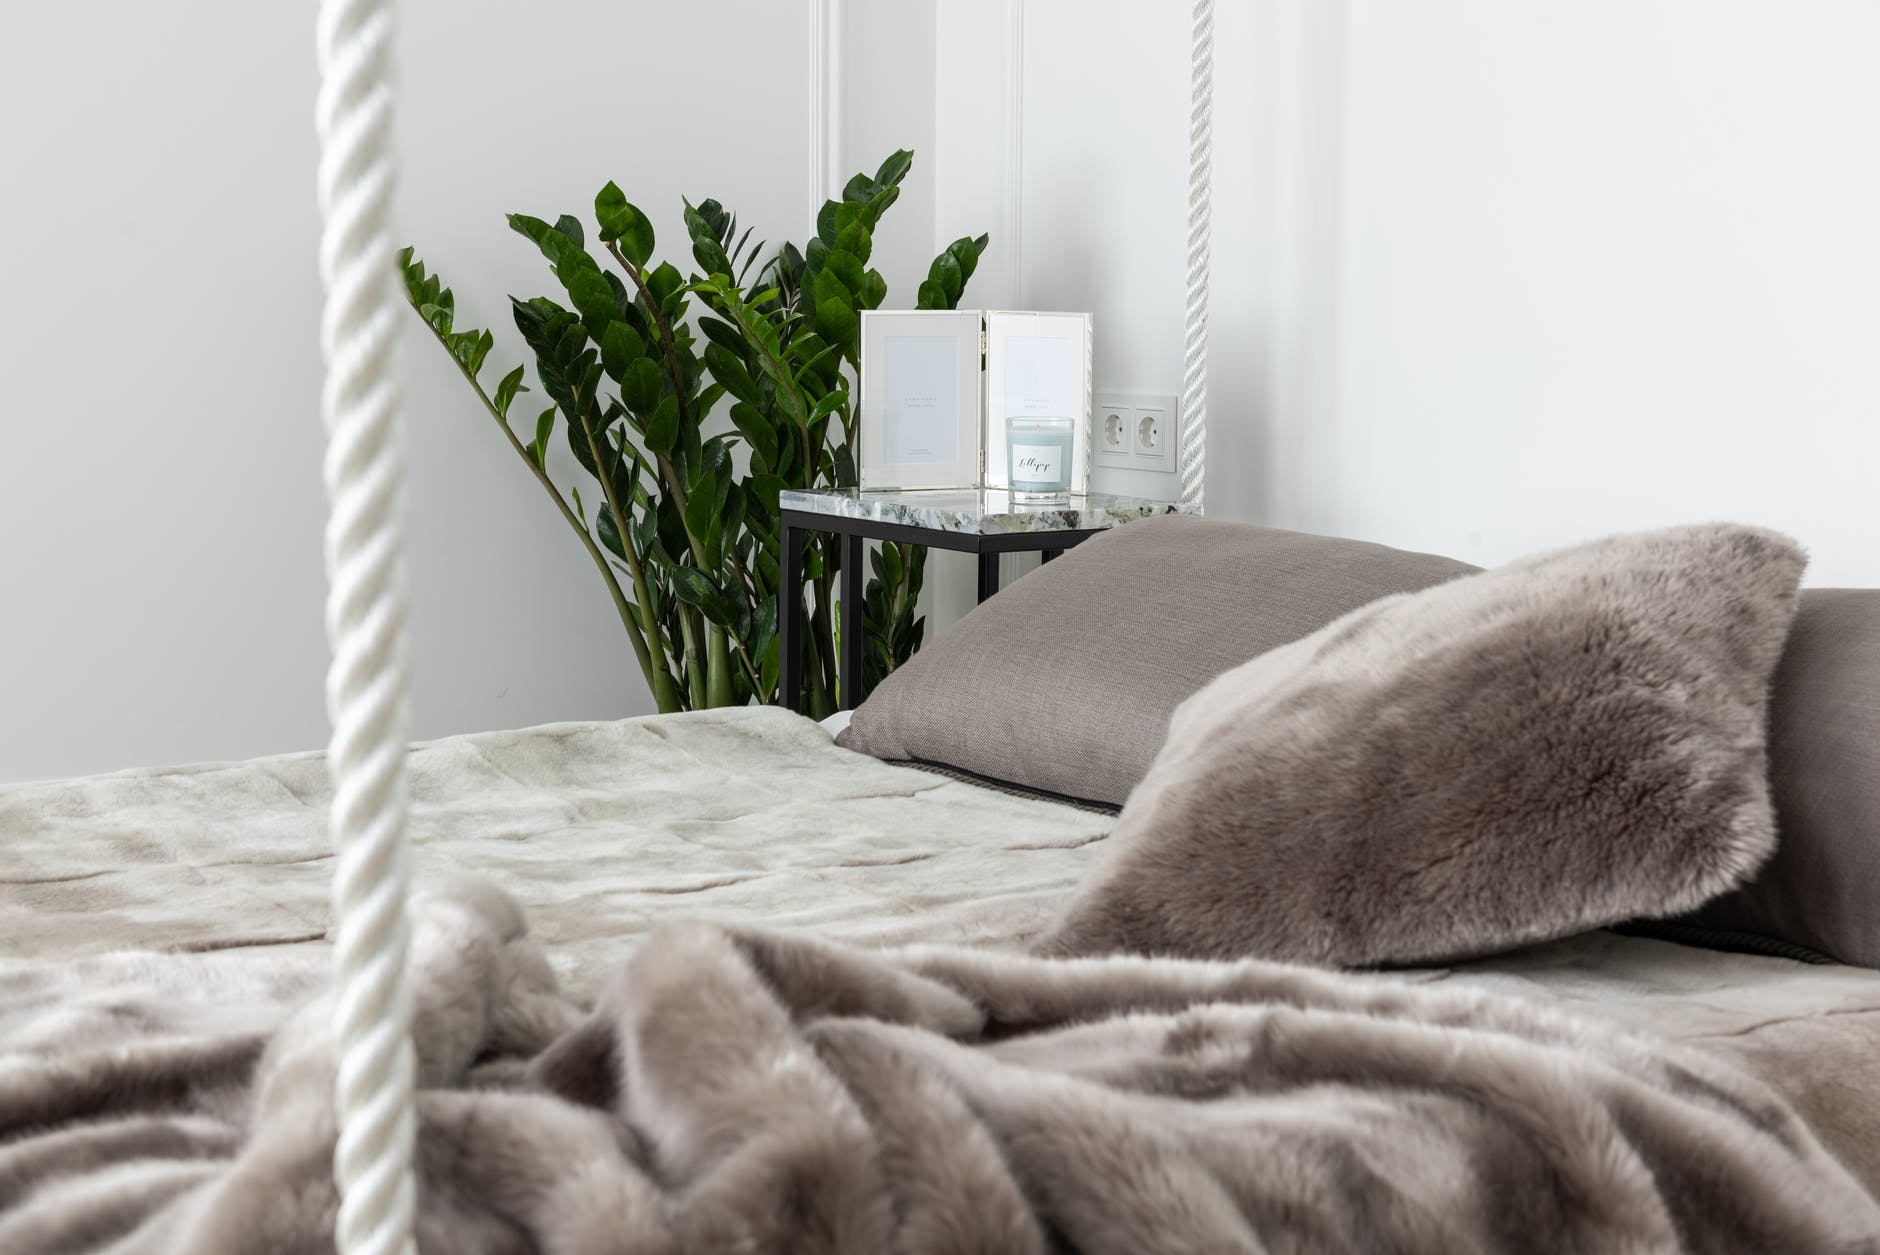 Eco-friendly bedsheets and homewares